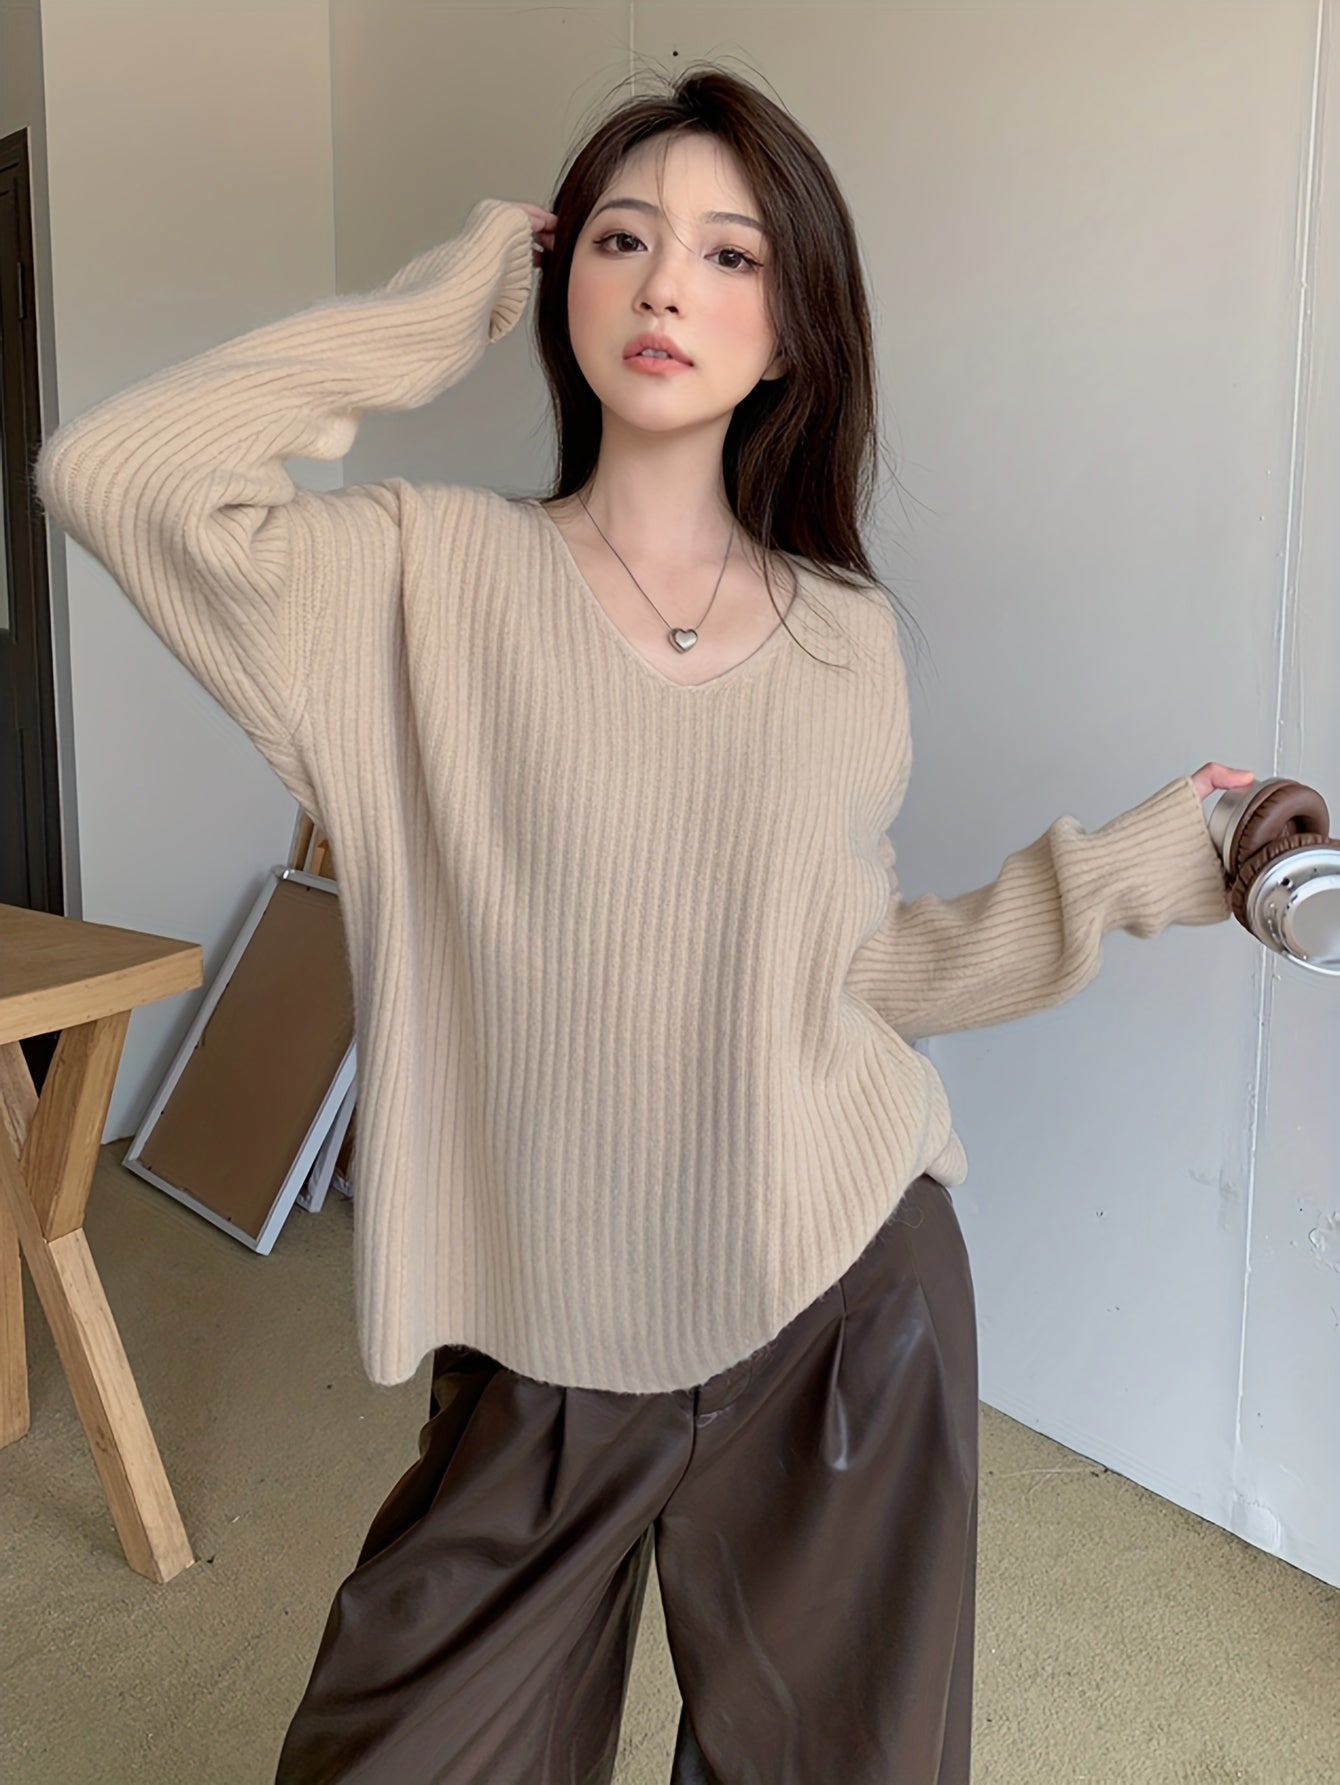 Antmvs Solid V Neck Pullover Sweater, Casual Long Sleeve Loose Slouchy Sweater, Women's Clothing